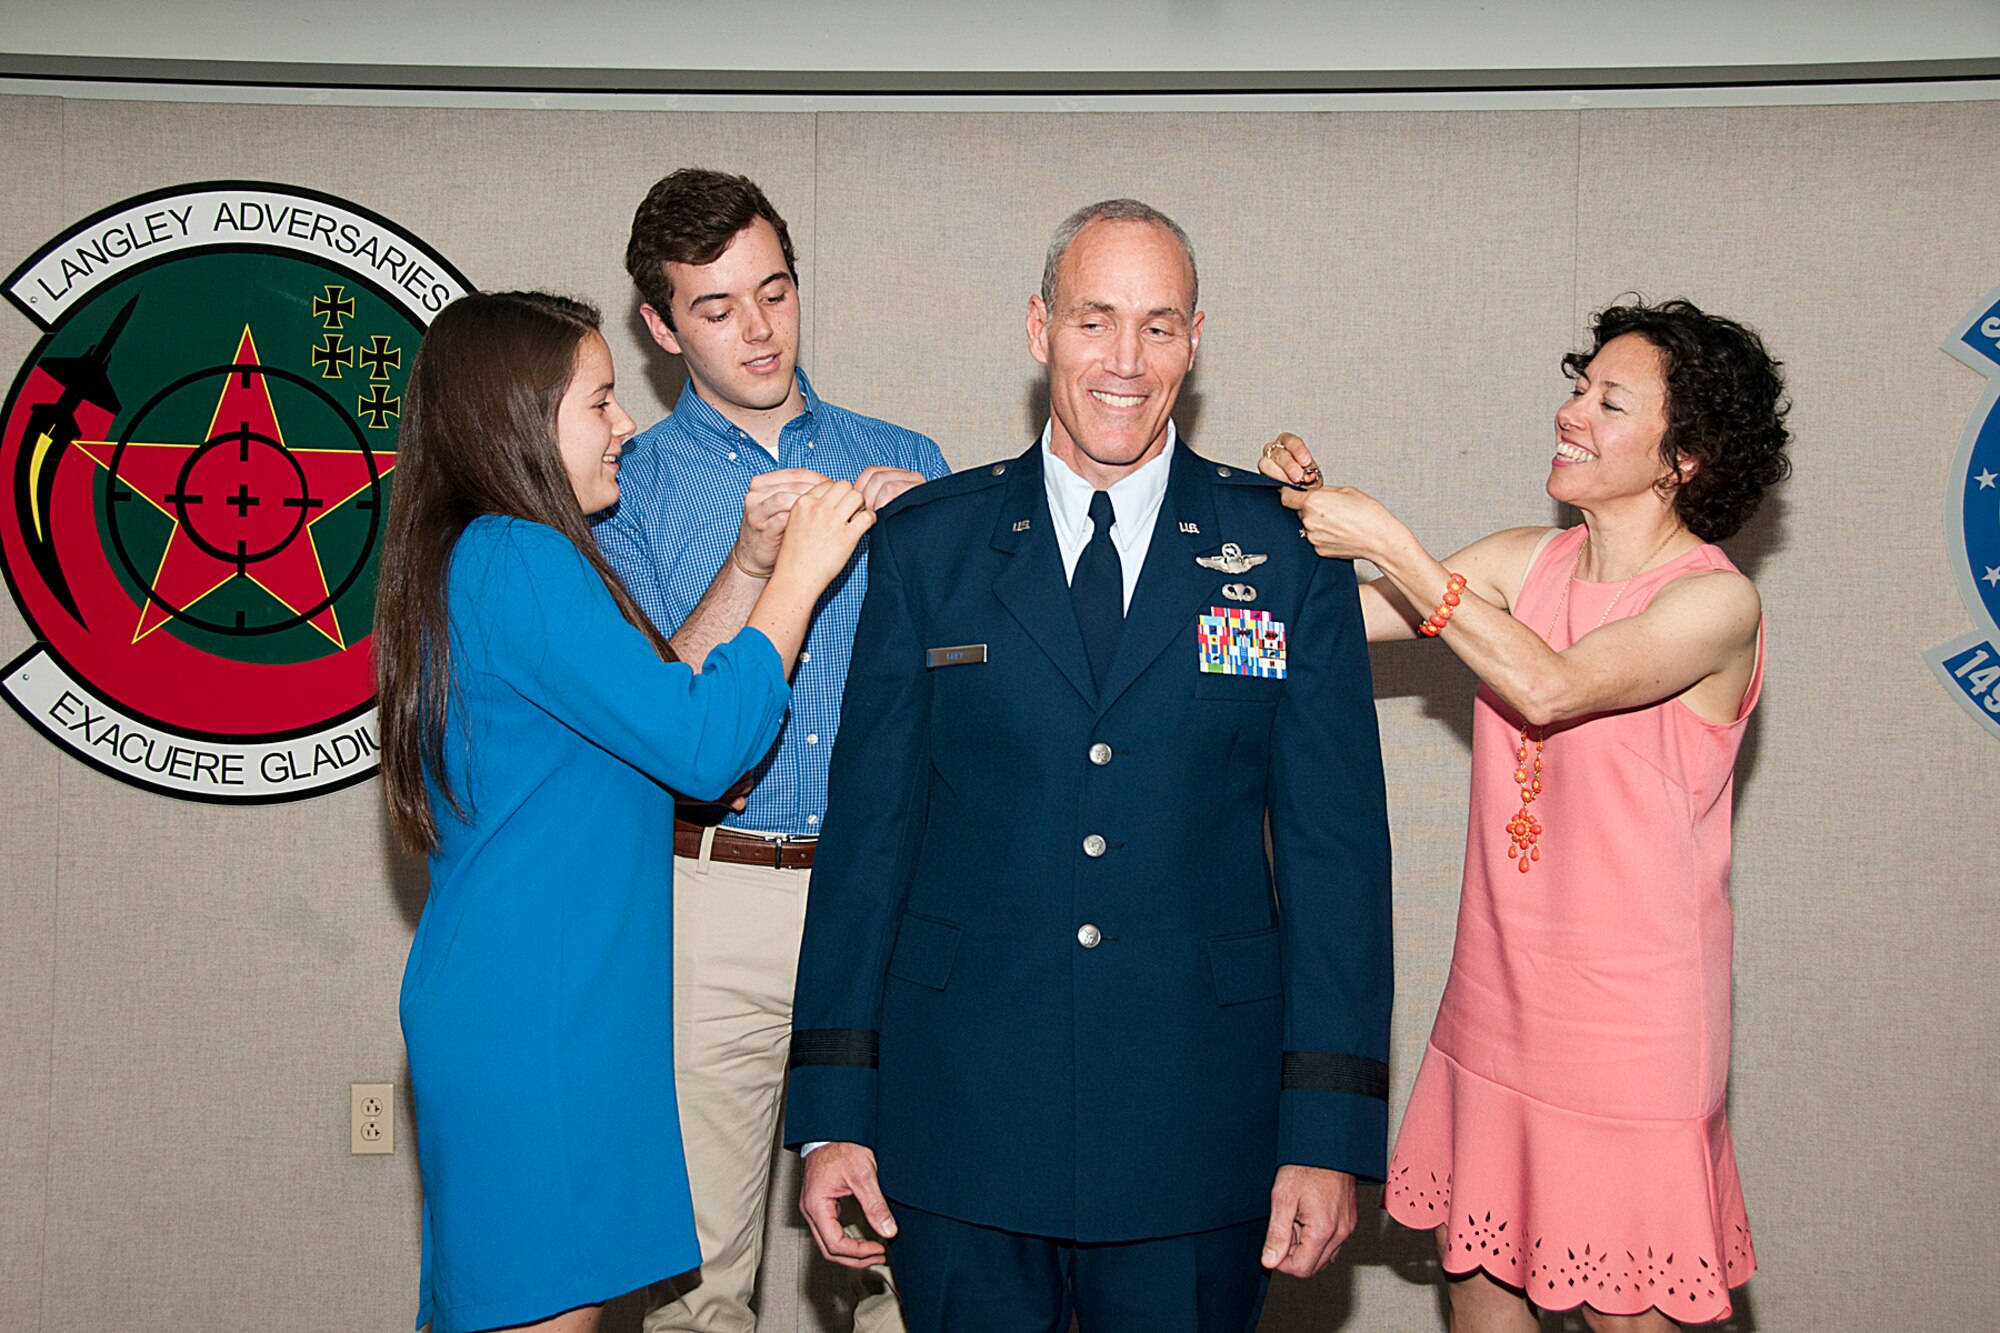 U.S. Air Force Col. Robert J. Grey, Virginia Assistant Adjutant General, Air and Strategic Initiatives, is promoted to brigadier general June 16, 2016, at Joint Base Langley-Eustis, 149th Fighter Wing, Hampton, Virginia. His wife, Francine, son, Bobby, and daughter, Samantha, pin on his new rank during his promotion ceremony. (U.S. Air National Guard photo by Master Sgt. Carlos J. Claudio)